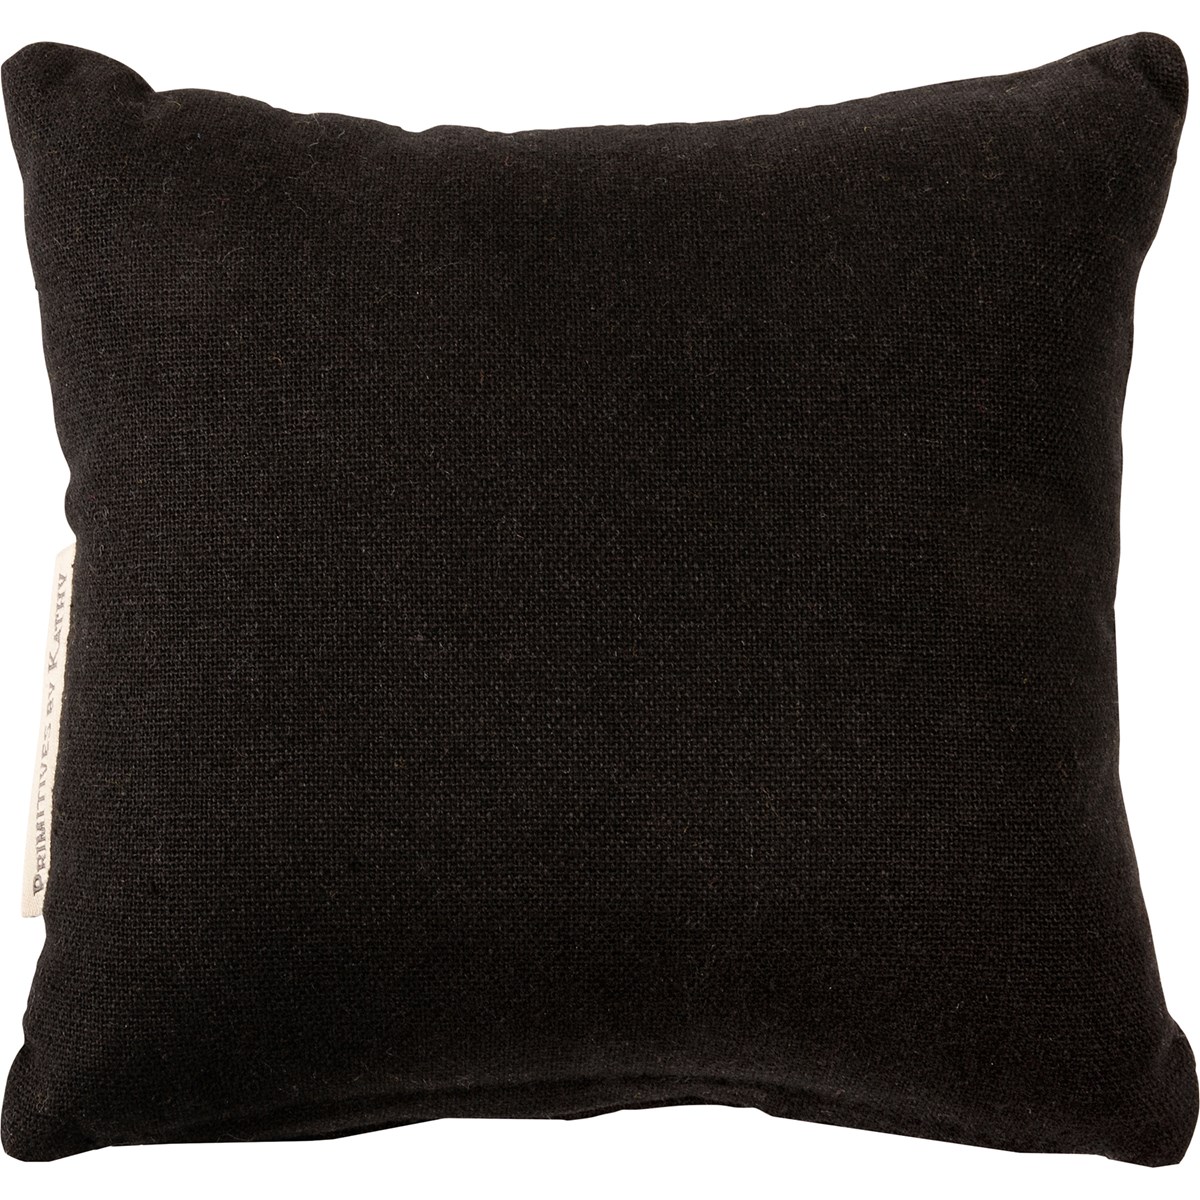 I Can't Say I Love You Enough Mini Pillow - Cotton